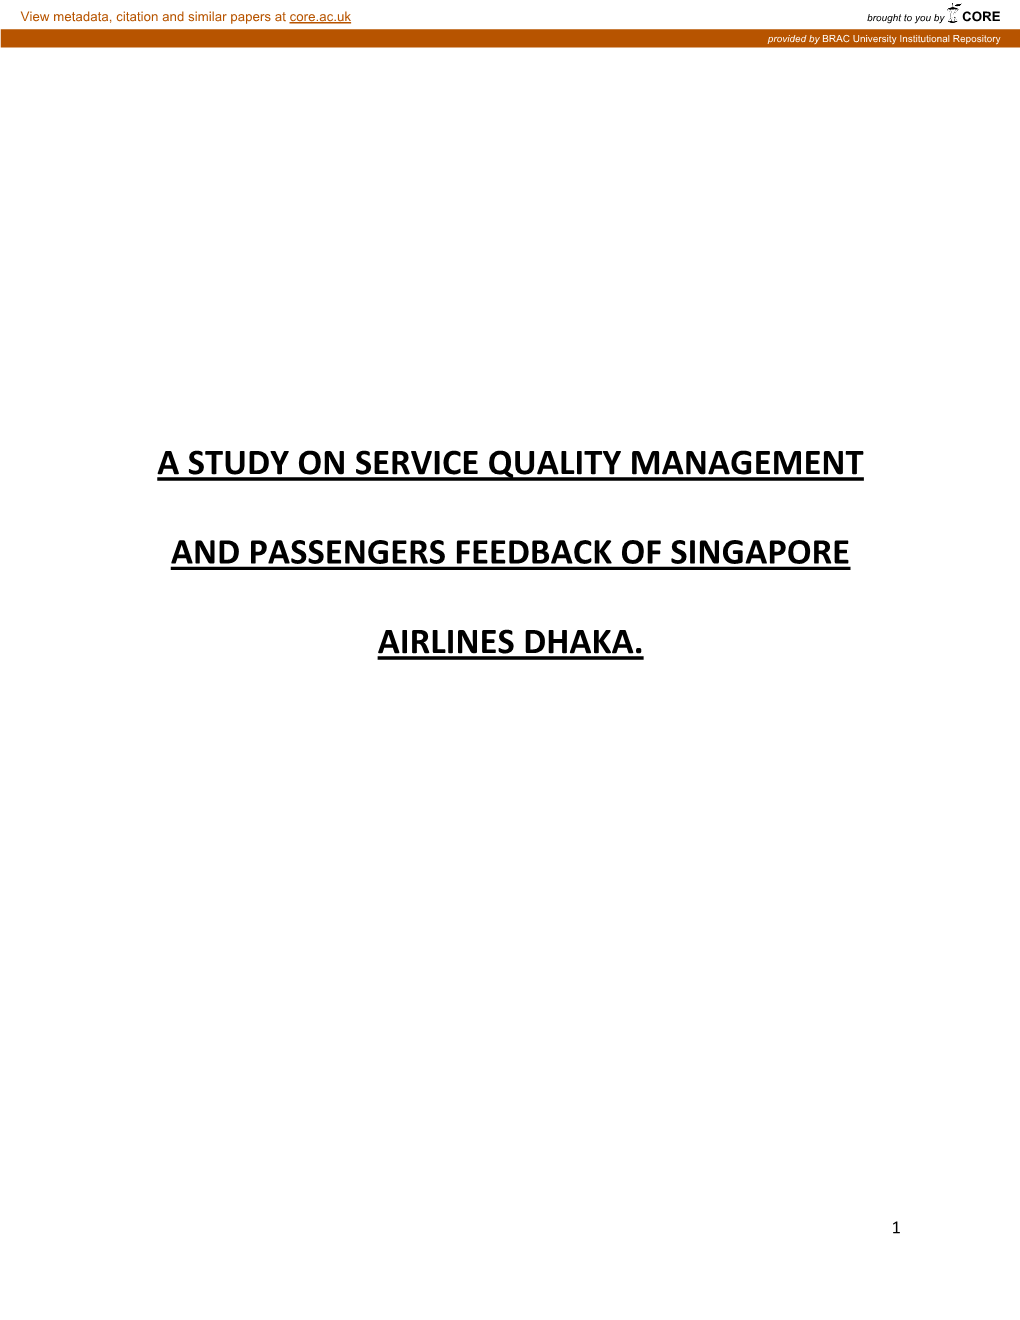 A Study on Service Quality Management And